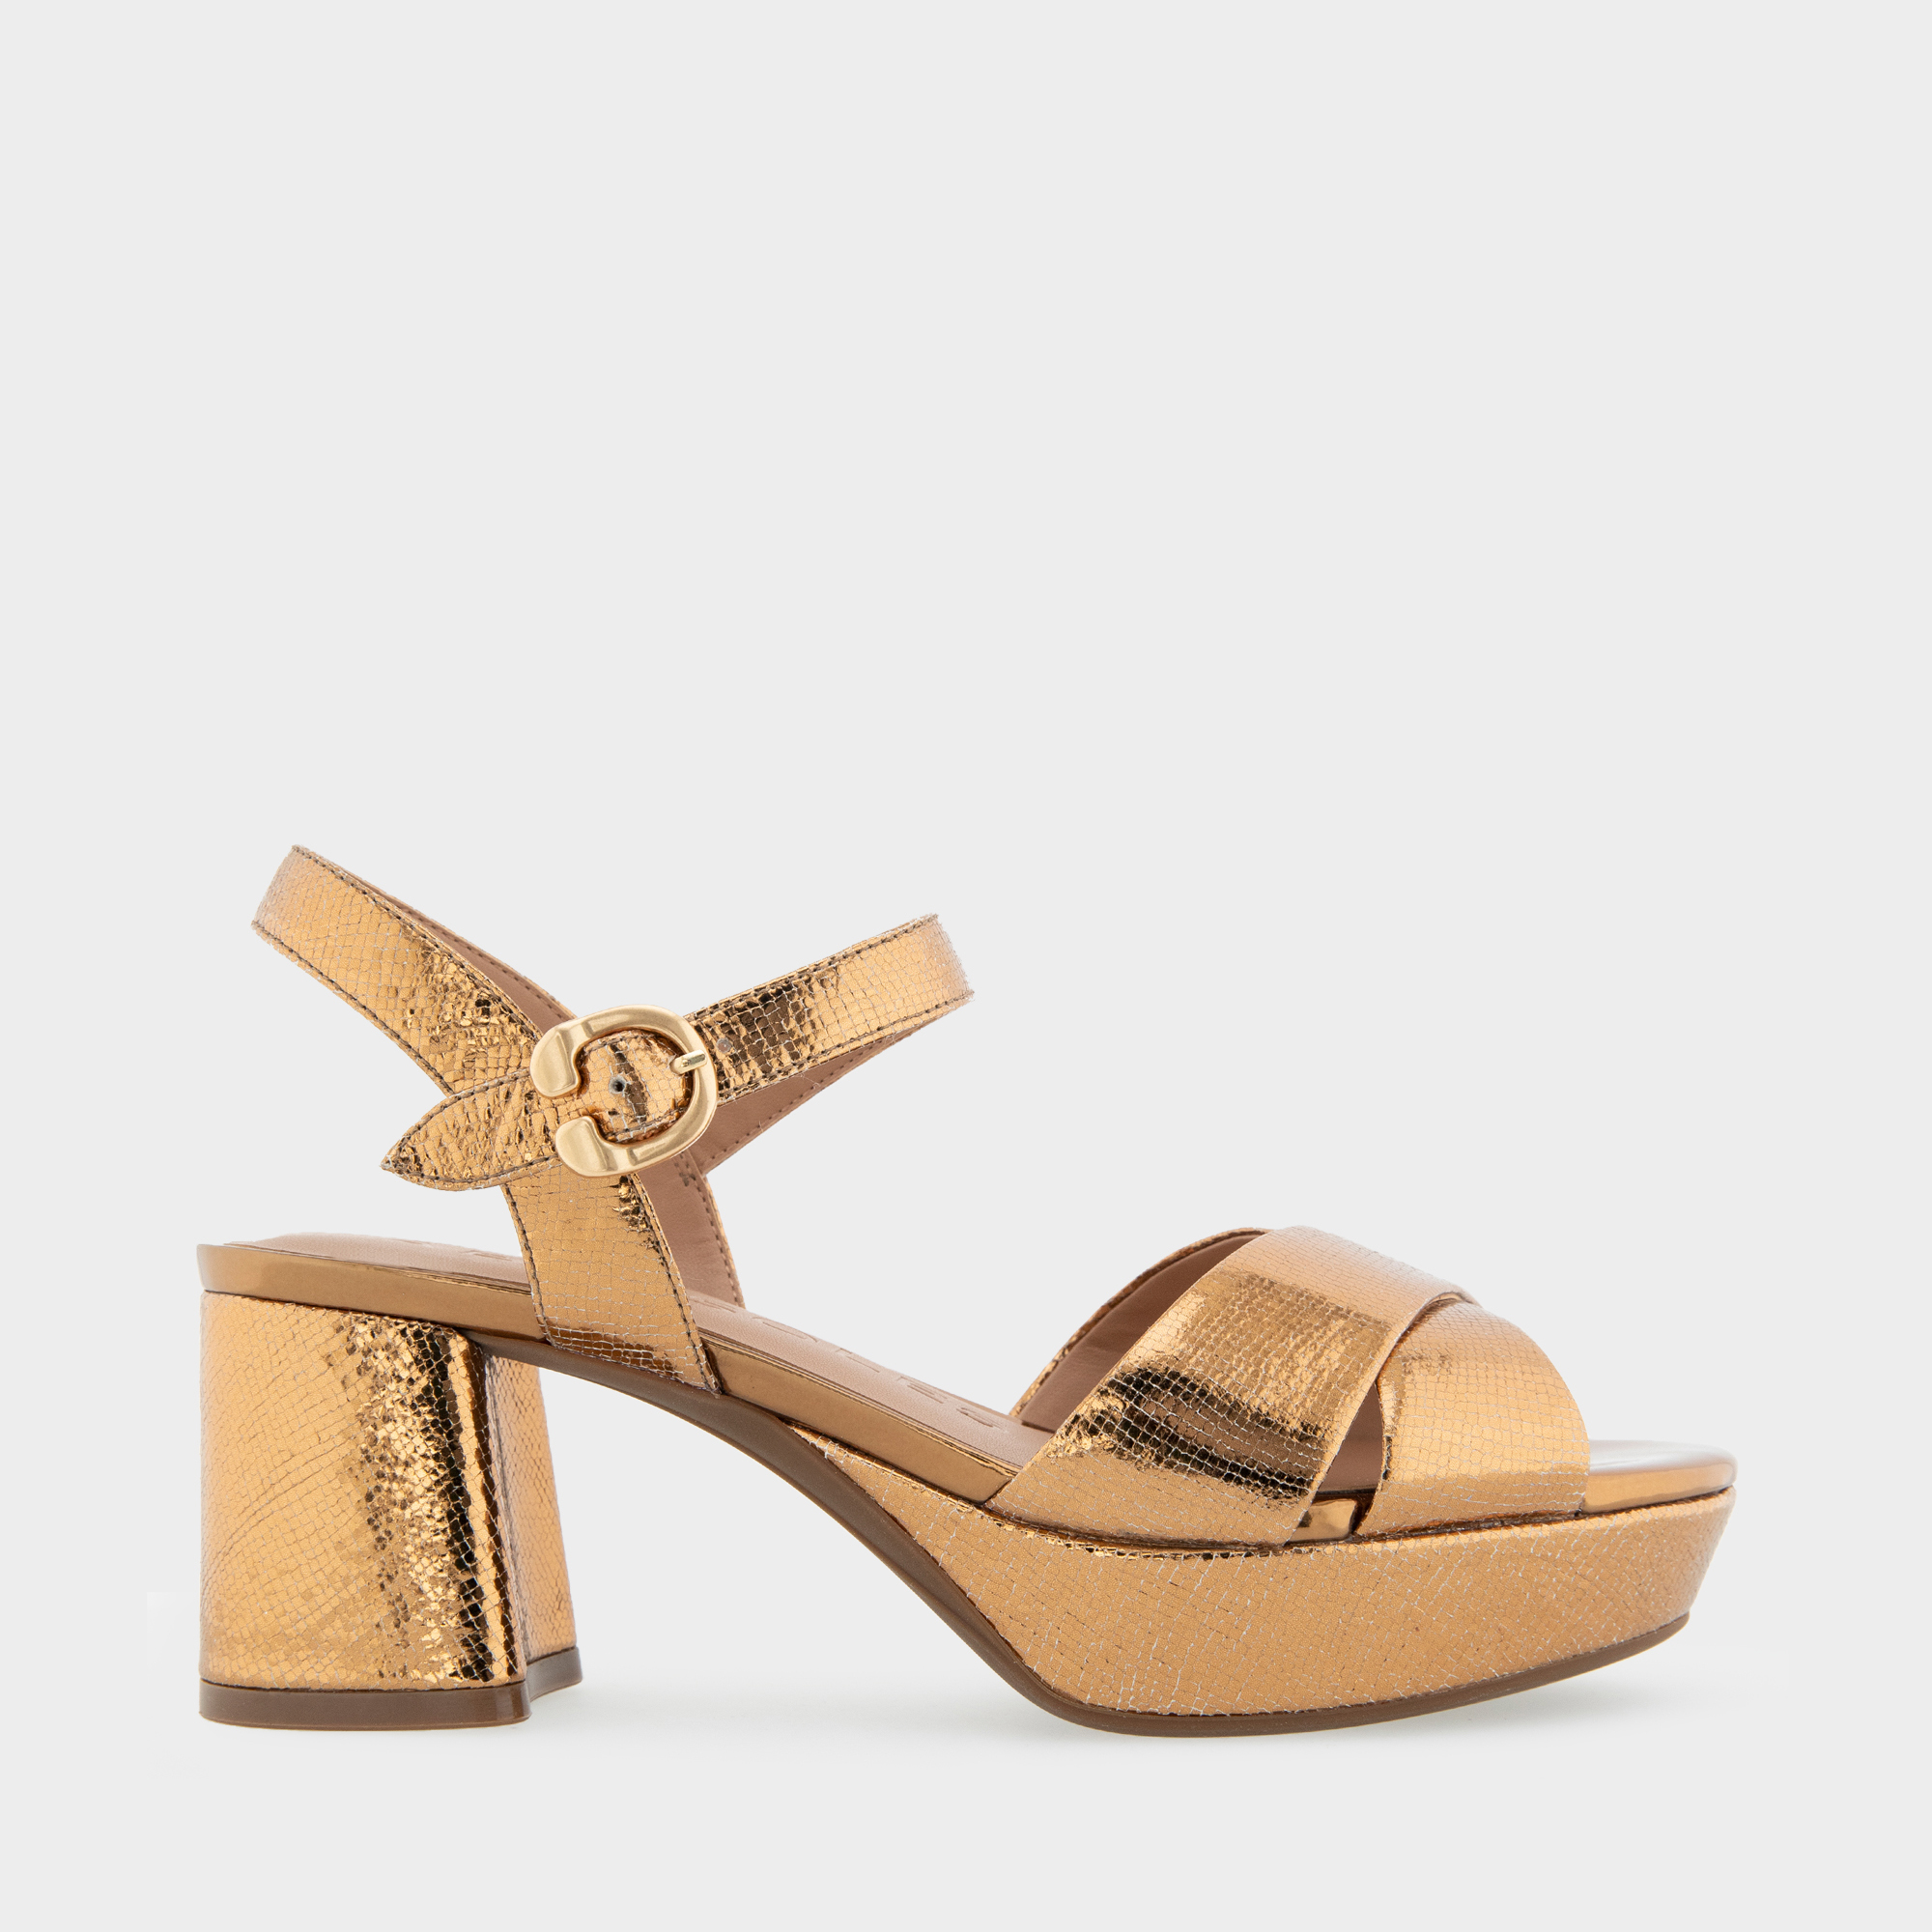 Cosmos Sandal in Bronze Leather